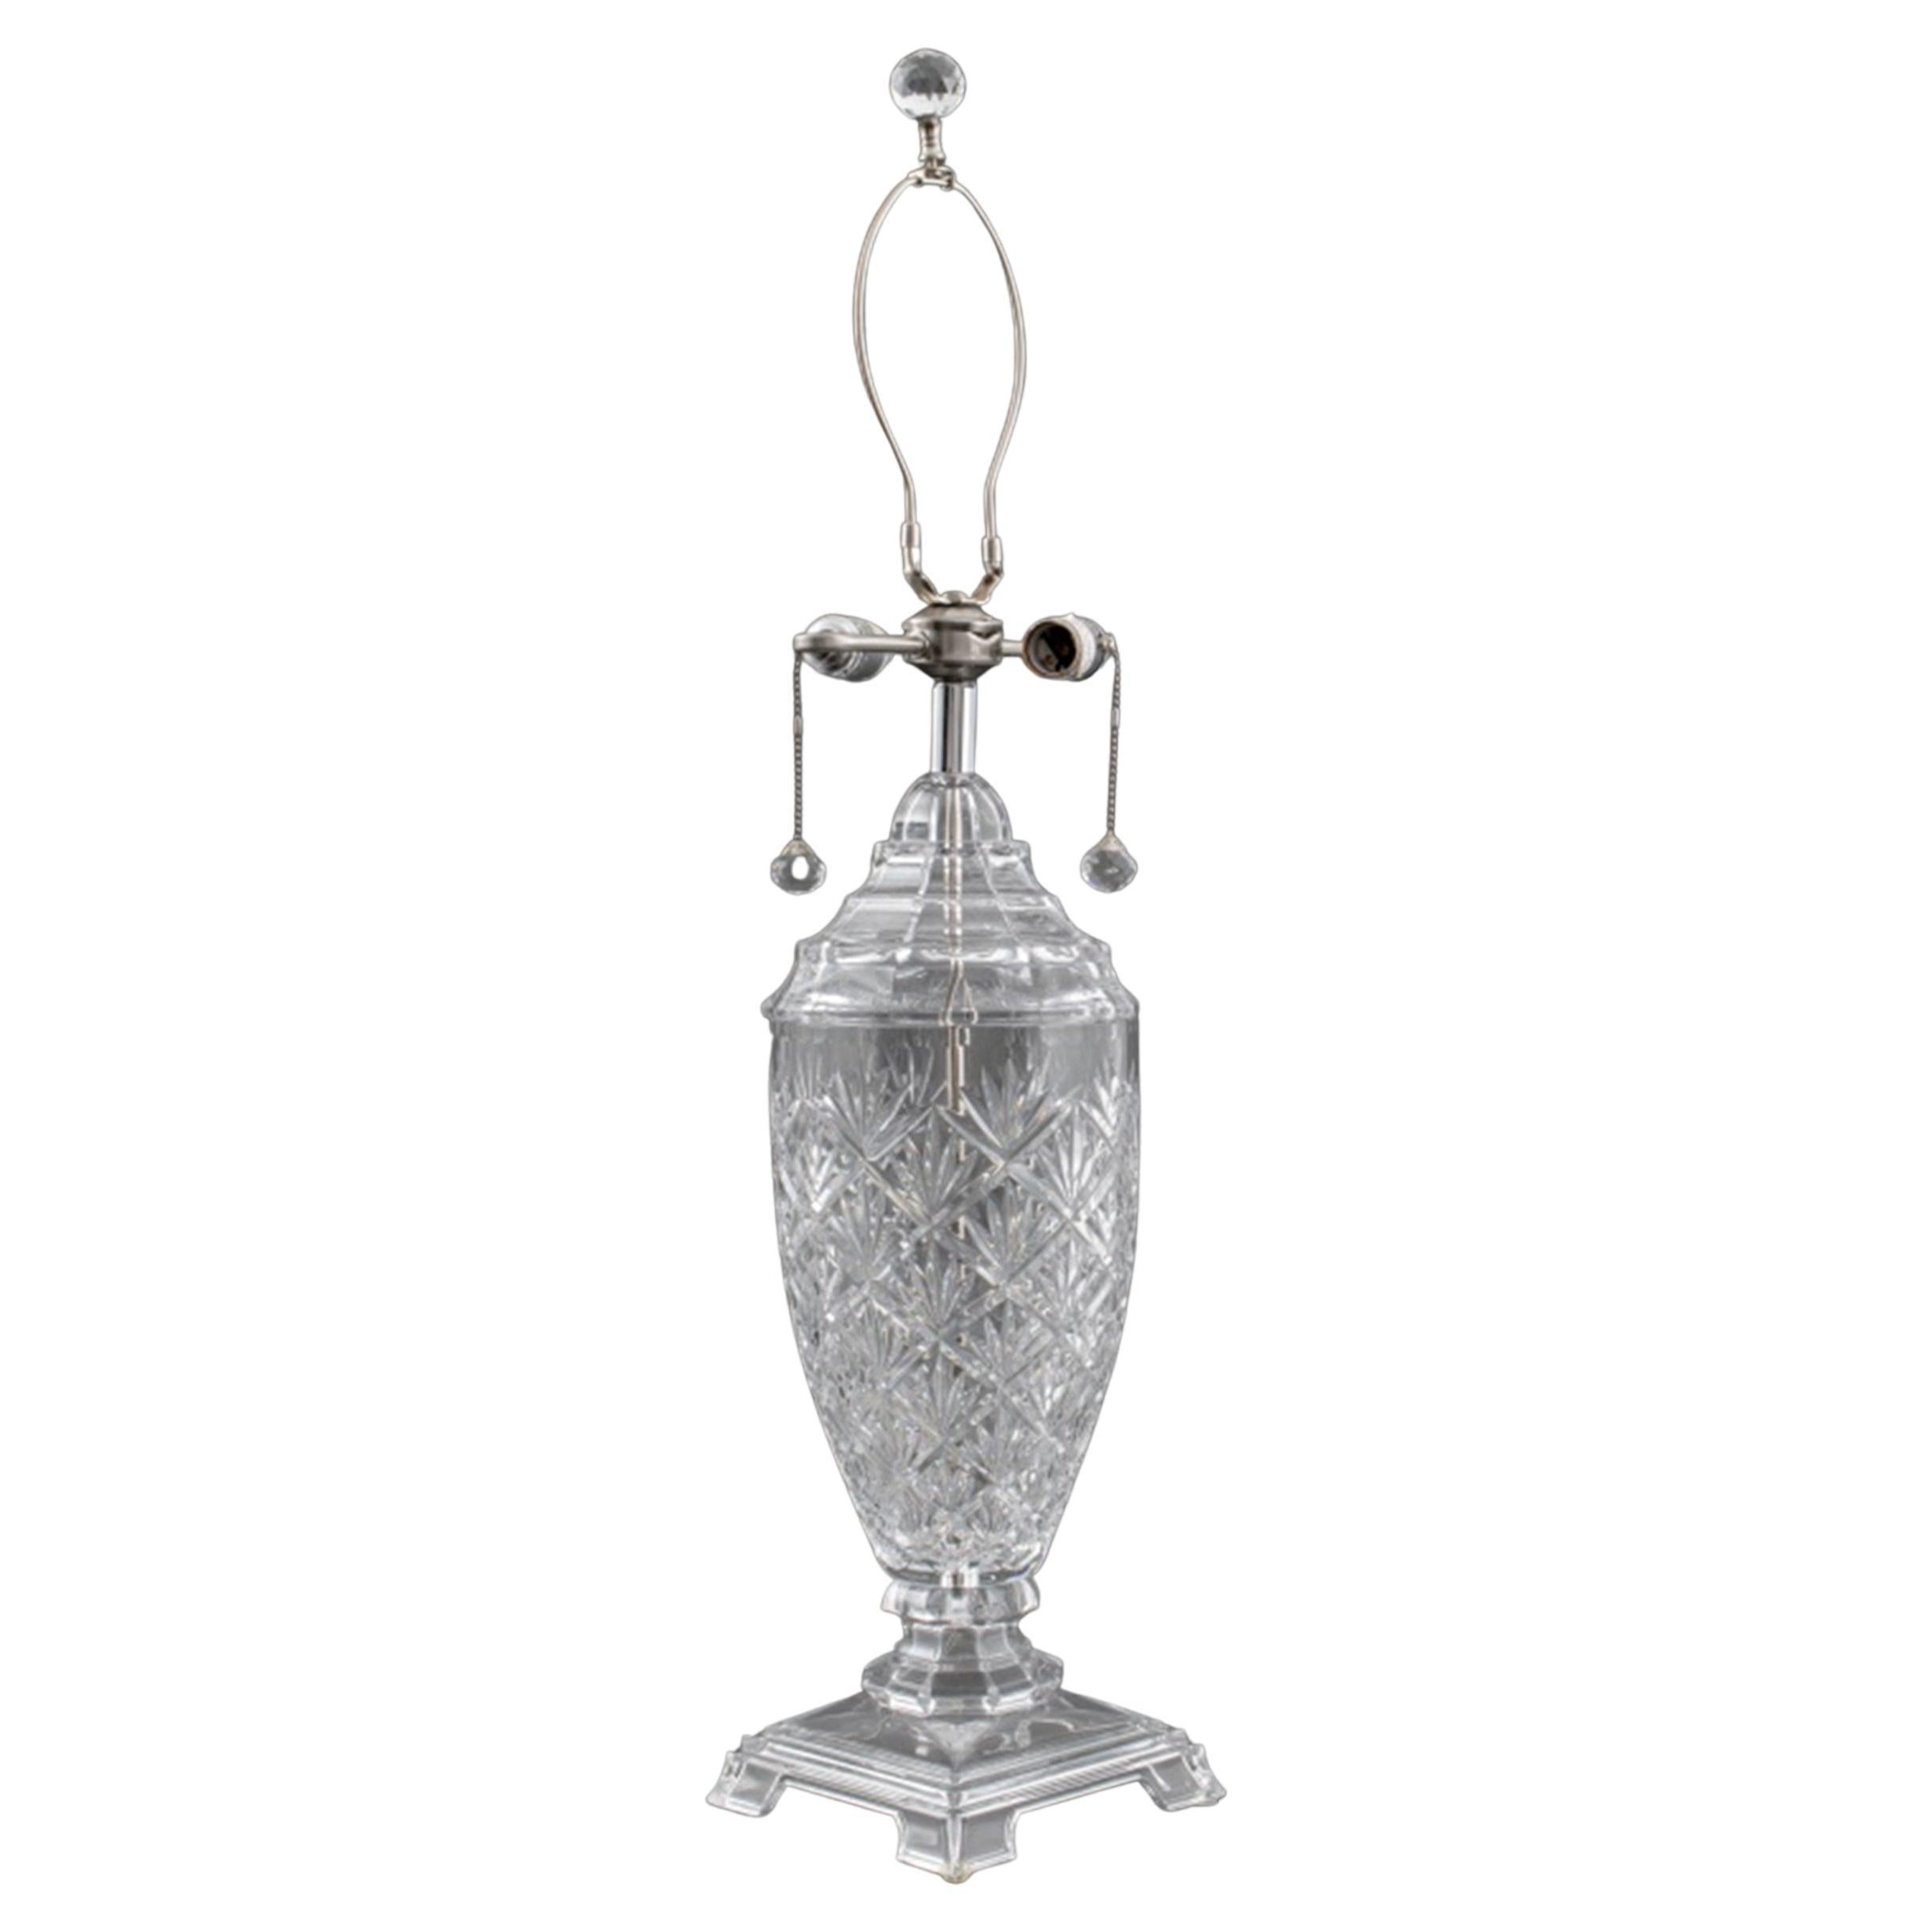 Waterford Style Classical Revival Cut Crystal Lamp For Sale